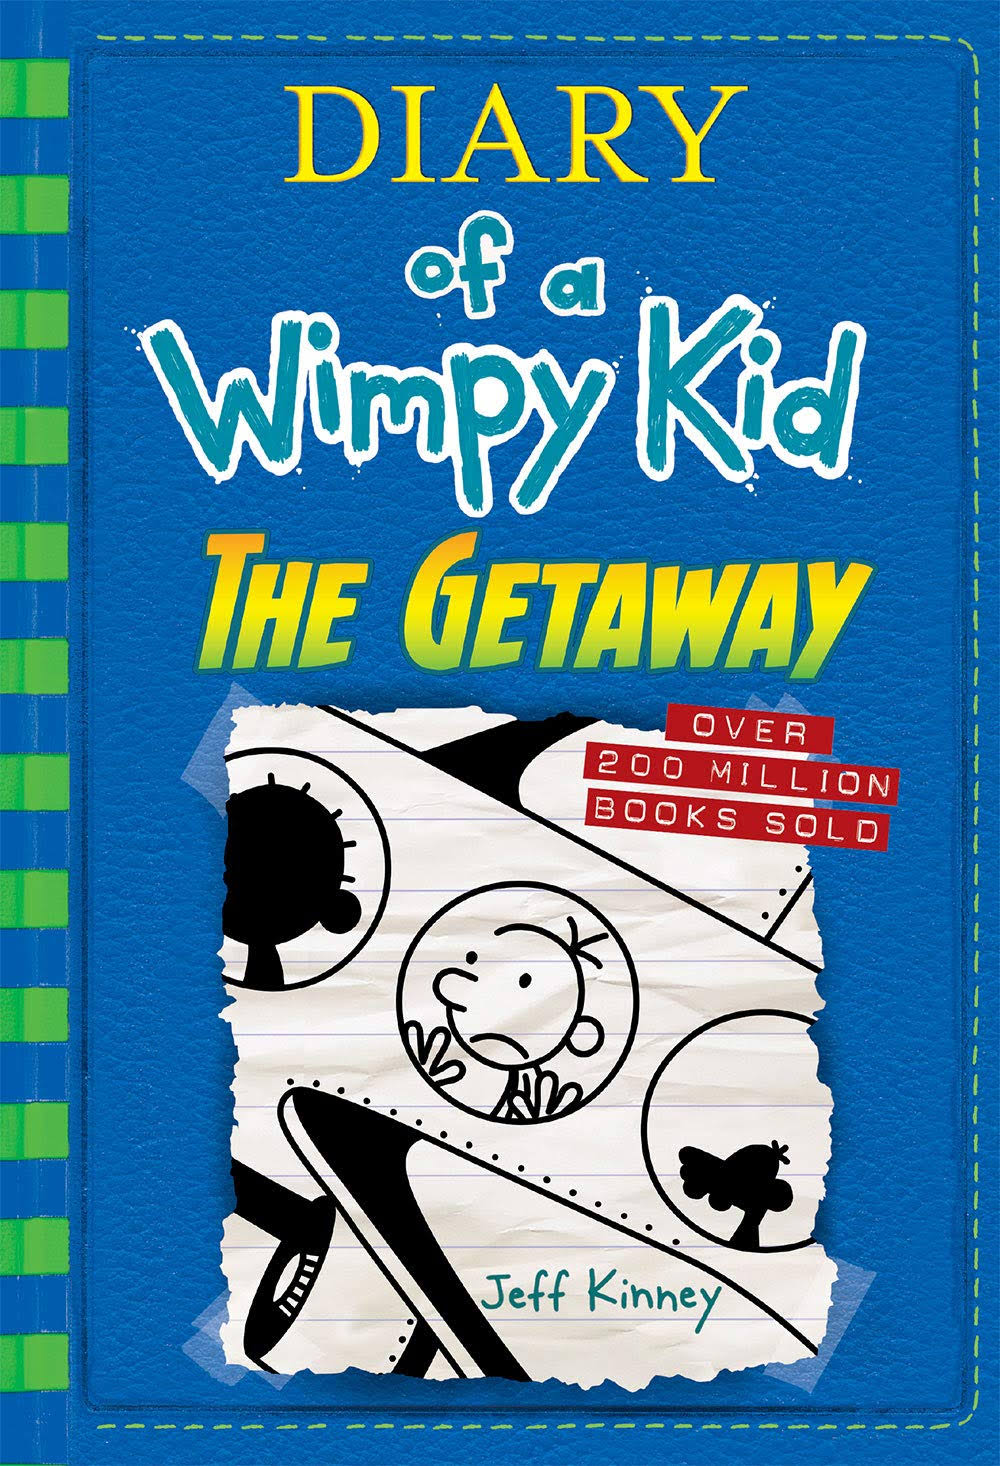 The Getaway (Diary of a Wimpy Kid Book 12) [Book]